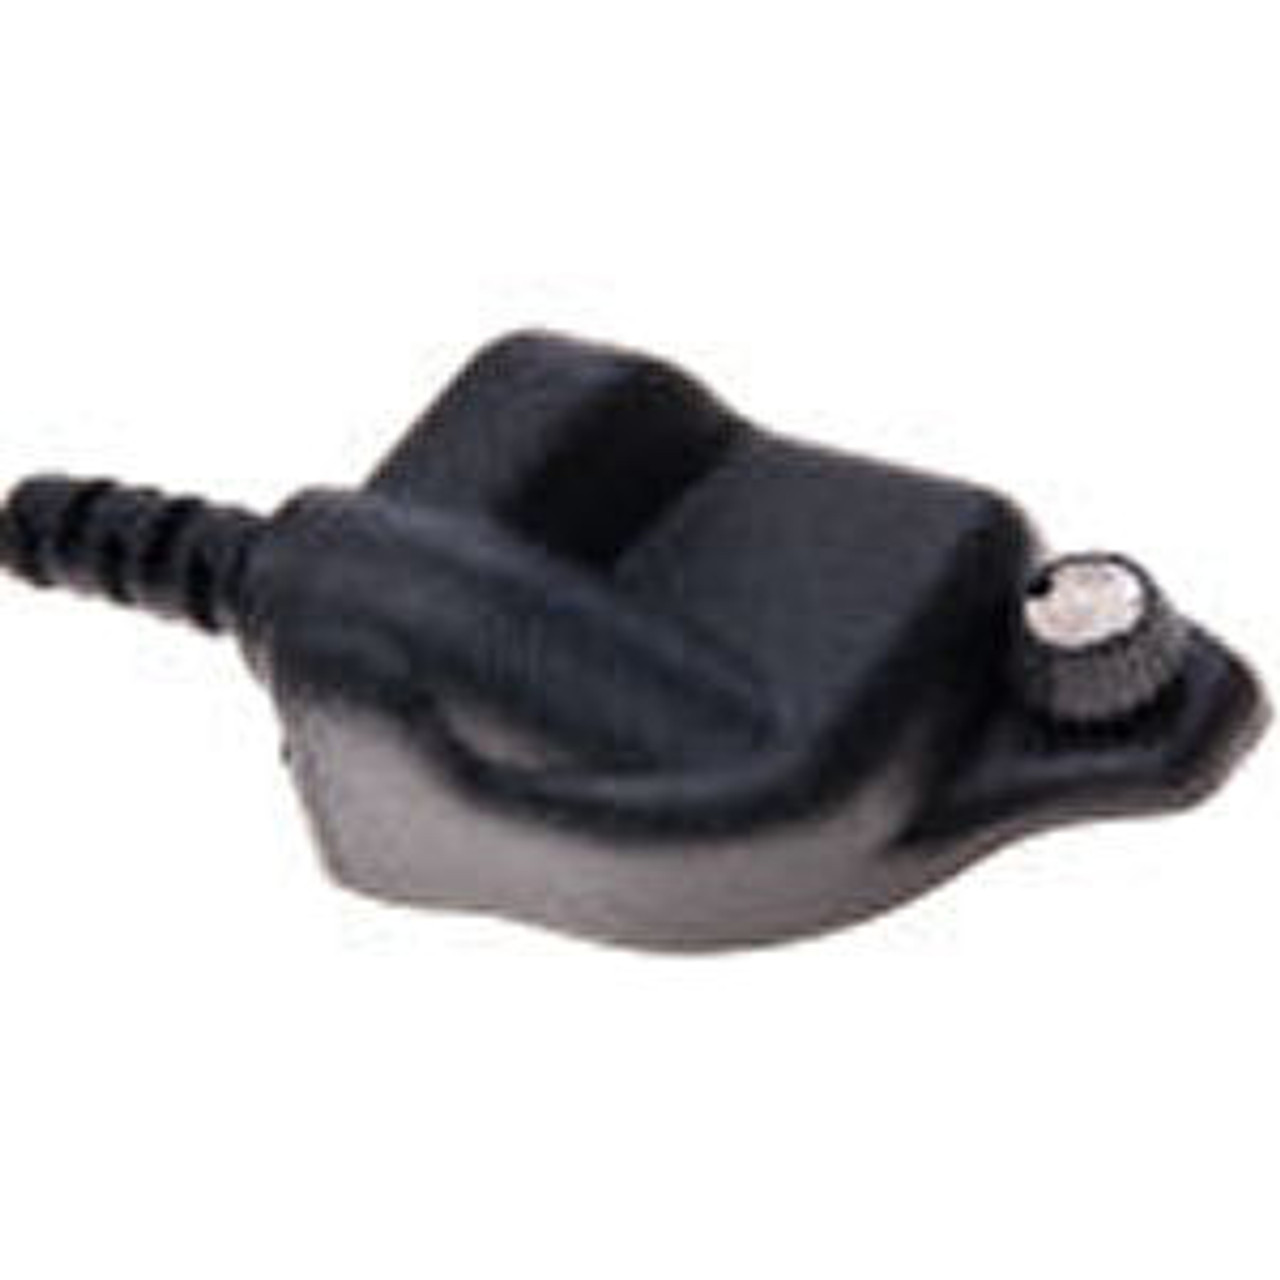 TAC 1 Systems IP67 E-Button Mic. Replaces Harris part number MAEV-NAE6A